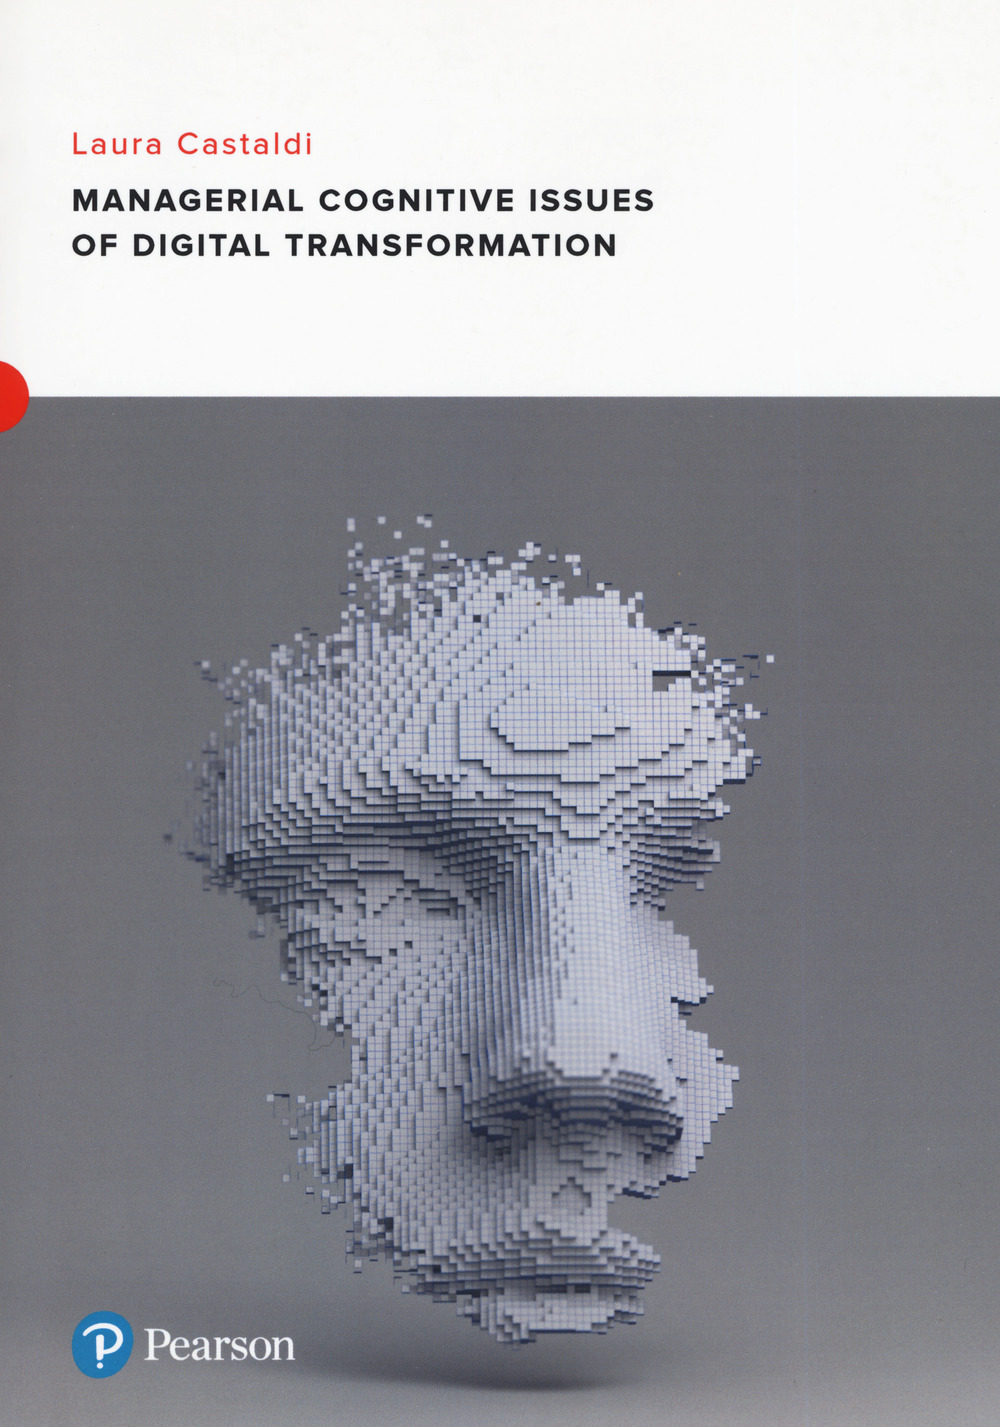 Managerial cognitive issues of digital transformation